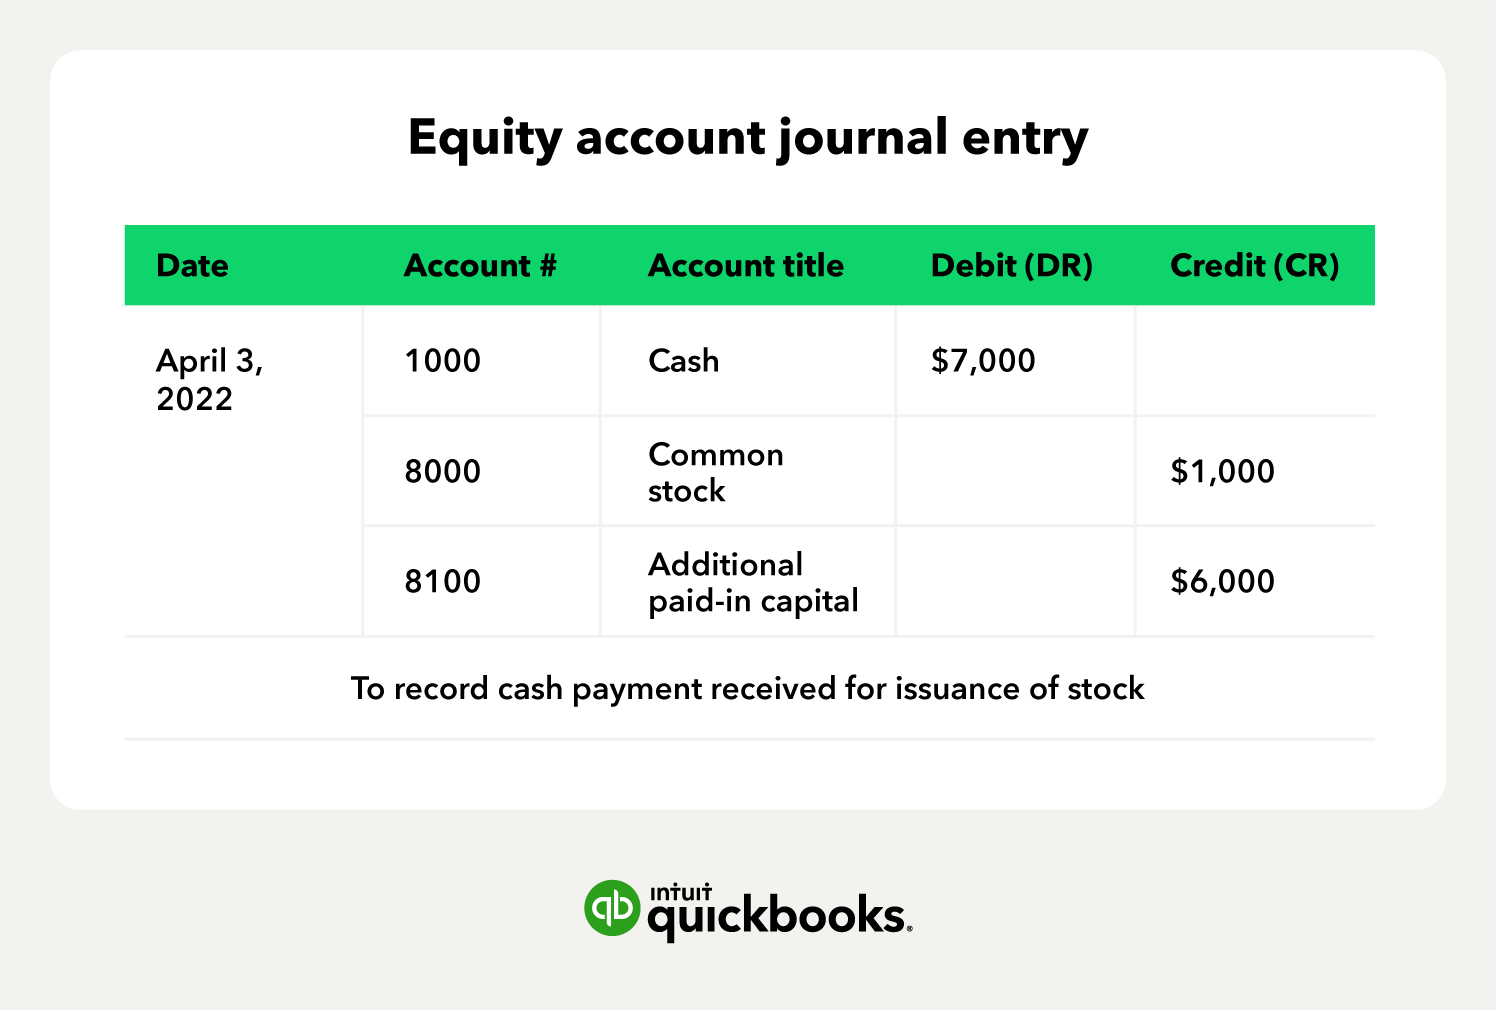 illustration of an equity account journal entry